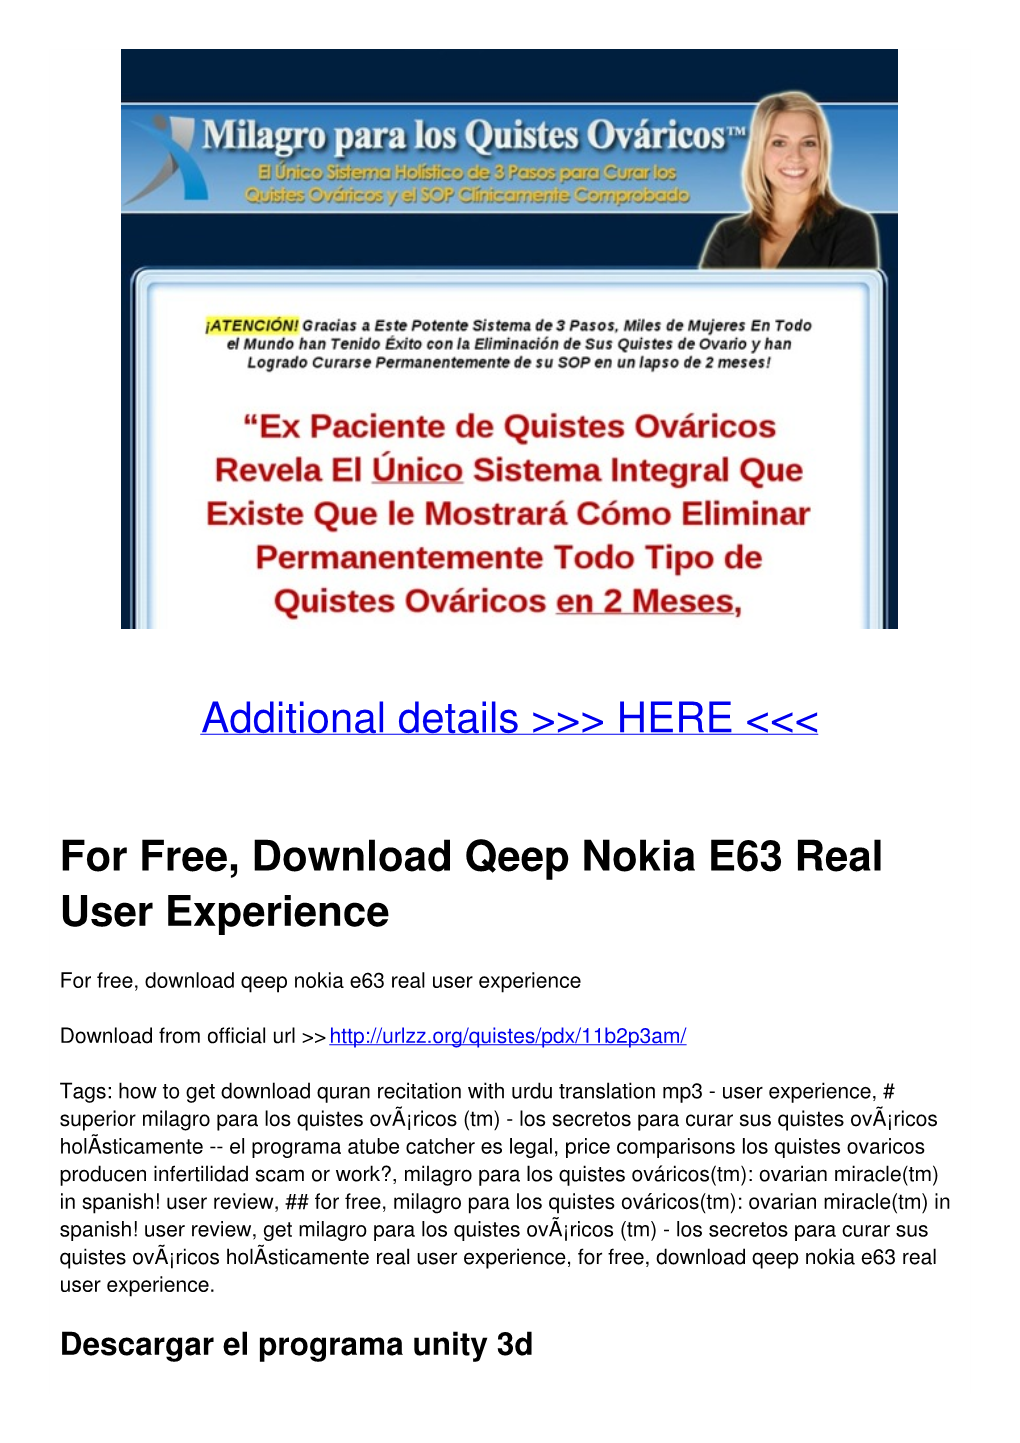 For Free, Download Qeep Nokia E63 Real User Experience